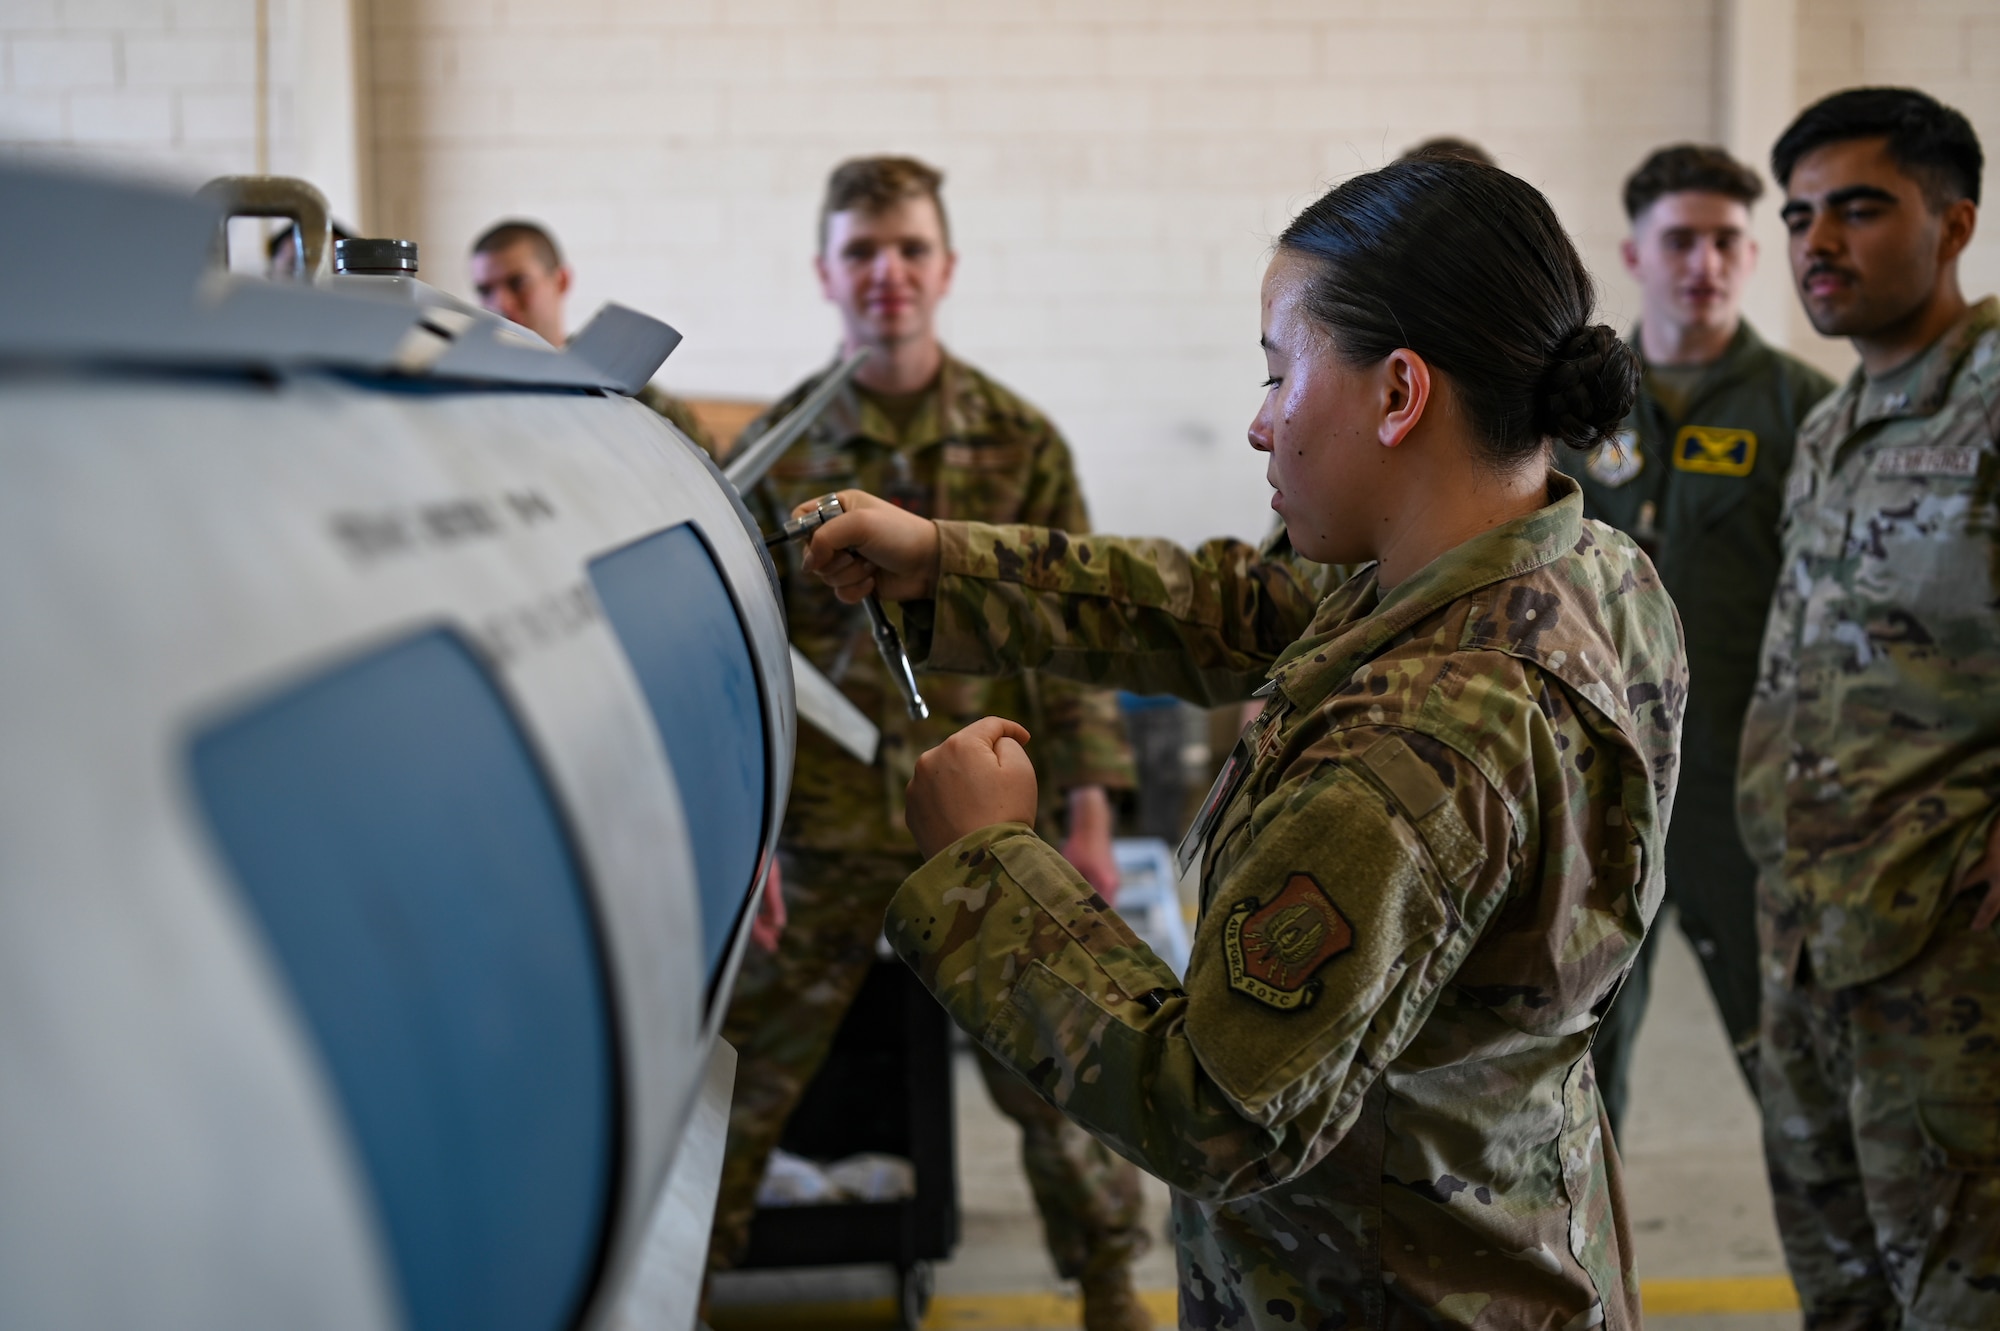 Anna Mason, Rochester Institute of Technology Air Force ROTC cadet, tightens a bolt on a munition during Project Tuskegee 2.0 at Dyess Air Force Base, Texas, Aug. 1, 2023. The project is intended to increase the cadets' understanding of Air Force and Space Force missions and day-to-day operations. The 19 cadets in attendance represent 19 different Air Force ROTC detachments across the enterprise's four regions. (U.S. Air Force photo by Airman 1st Class Emma Anderson)